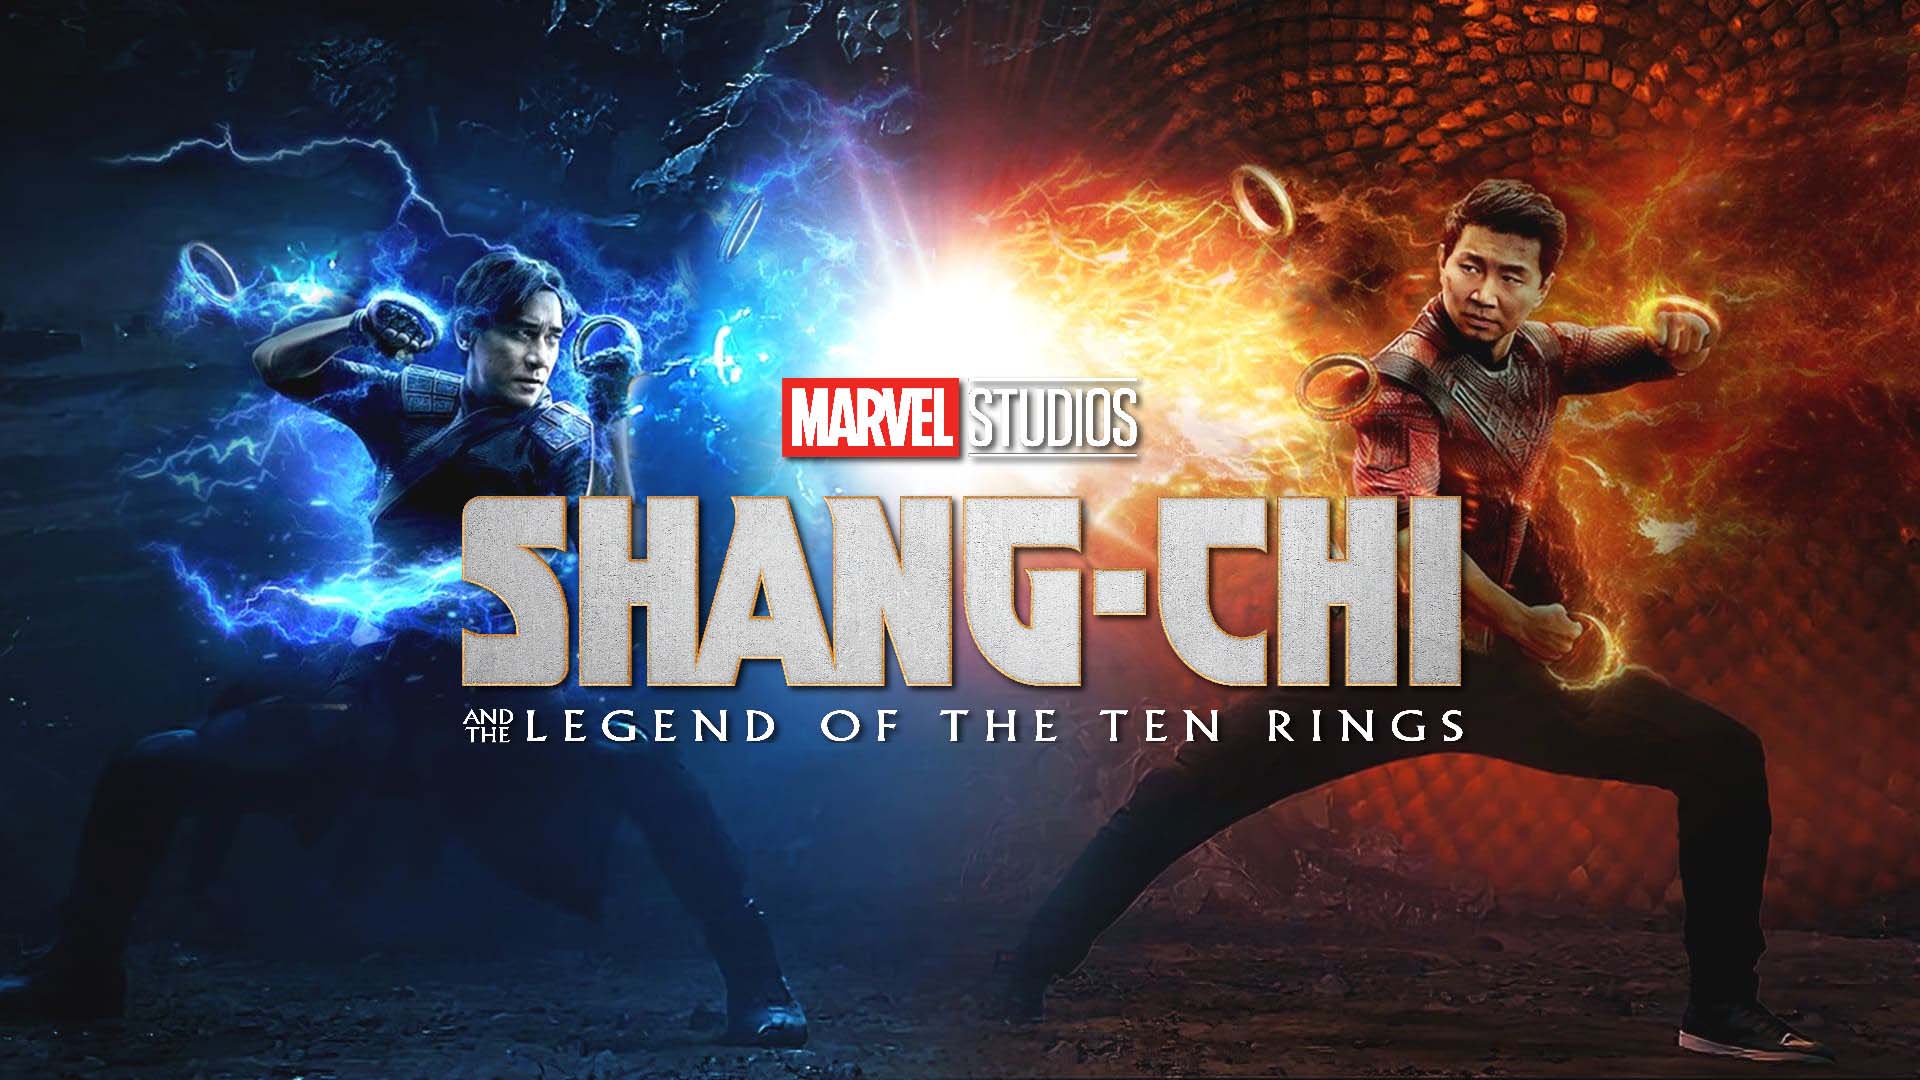 Shang-Chi and the Legend of the Ten Rings